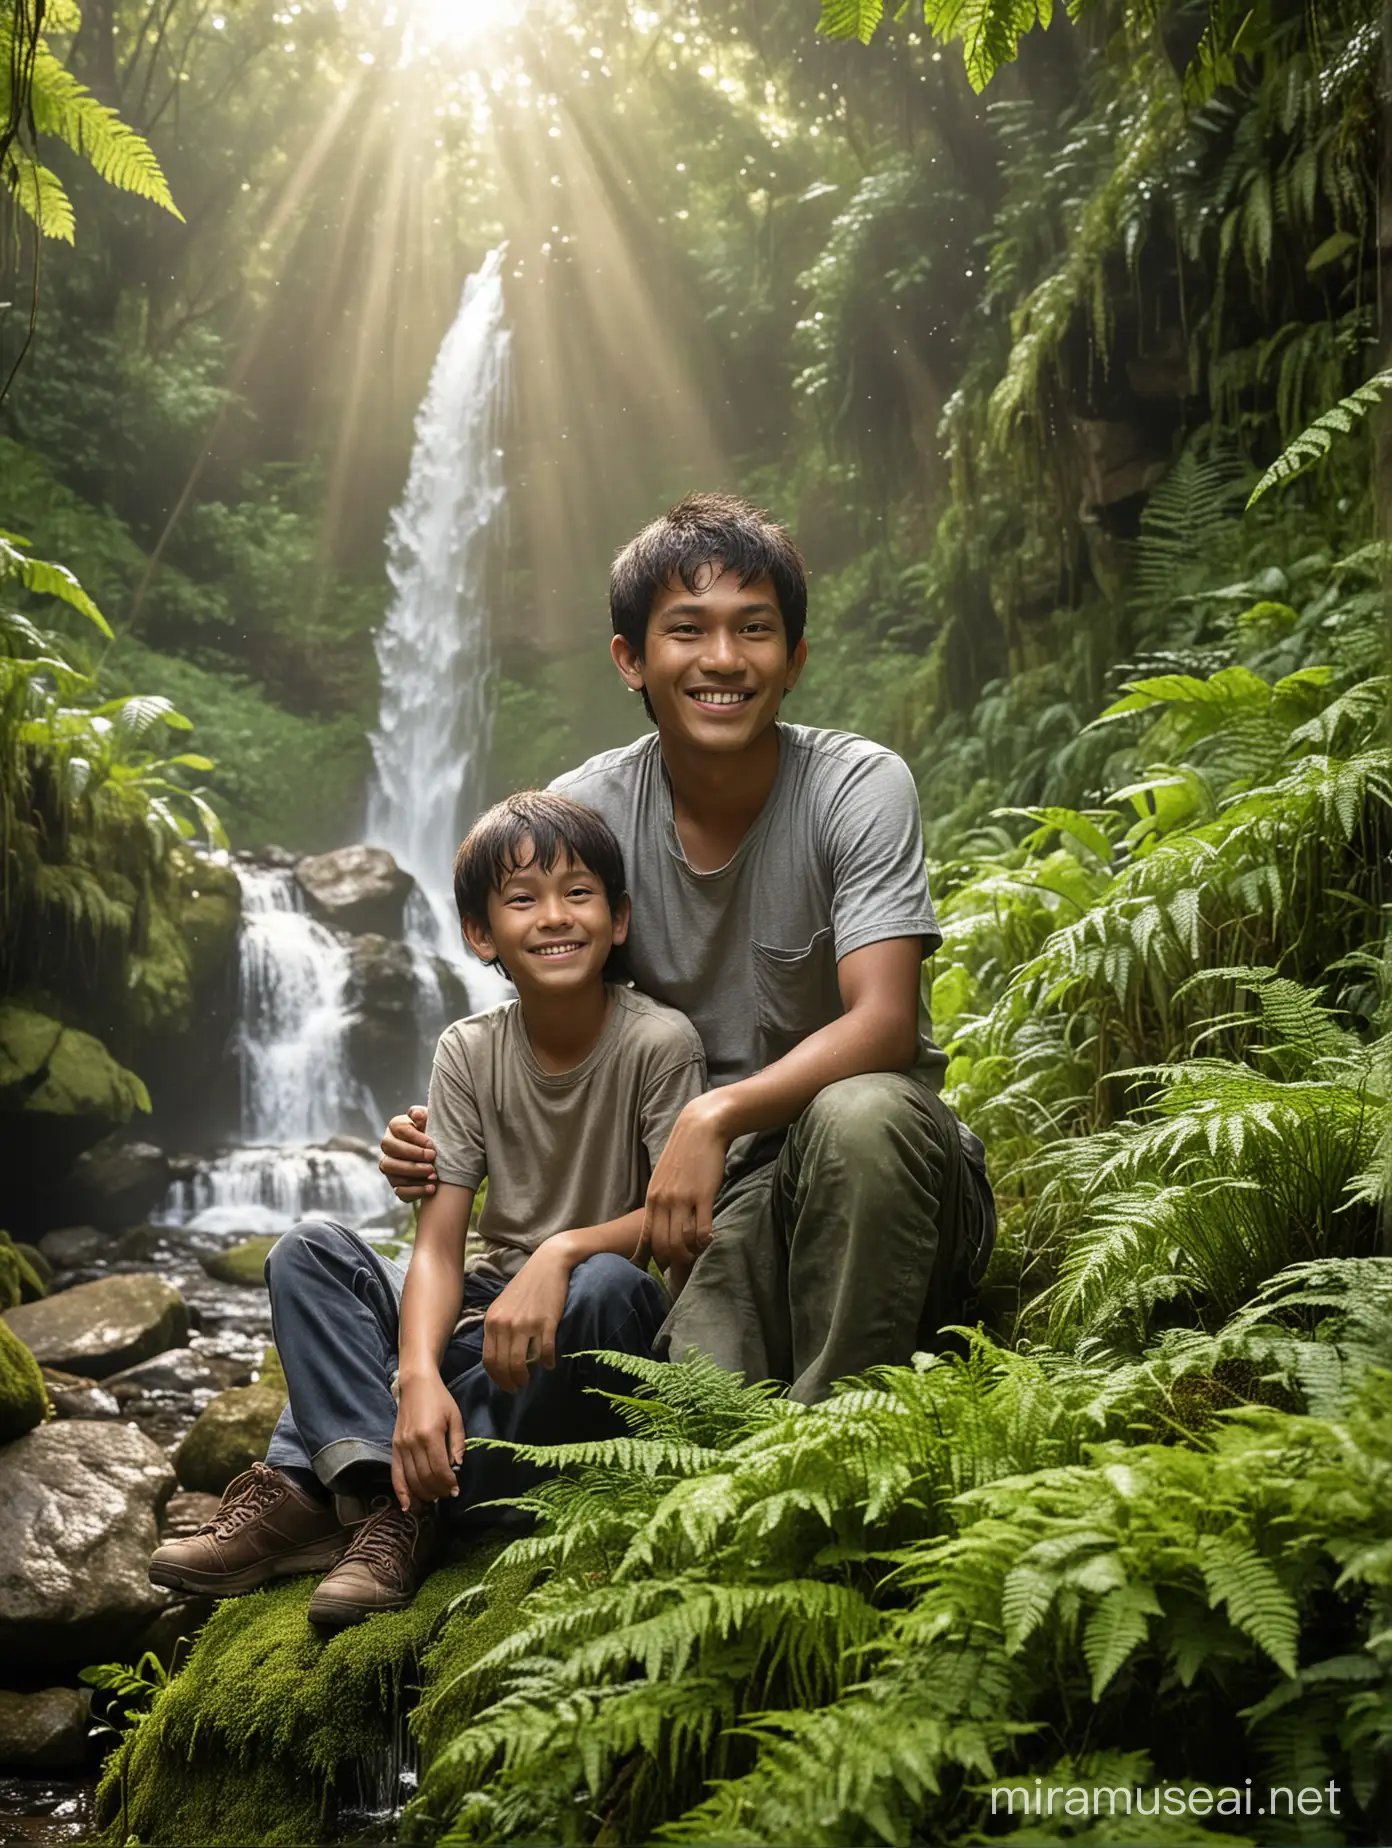 30 year old Indonesian young man sitting with his 10 year old boy on a rock facing the front camera while smiling in the middle of a forest filled with sunlight, sunlight penetrating between the leaves. Delicate dewdrops cling to ferns and wildflowers. In the background, a mystical waterfall cascades down moss-covered rocks, and mist rises into the air. High resolution, high realism.